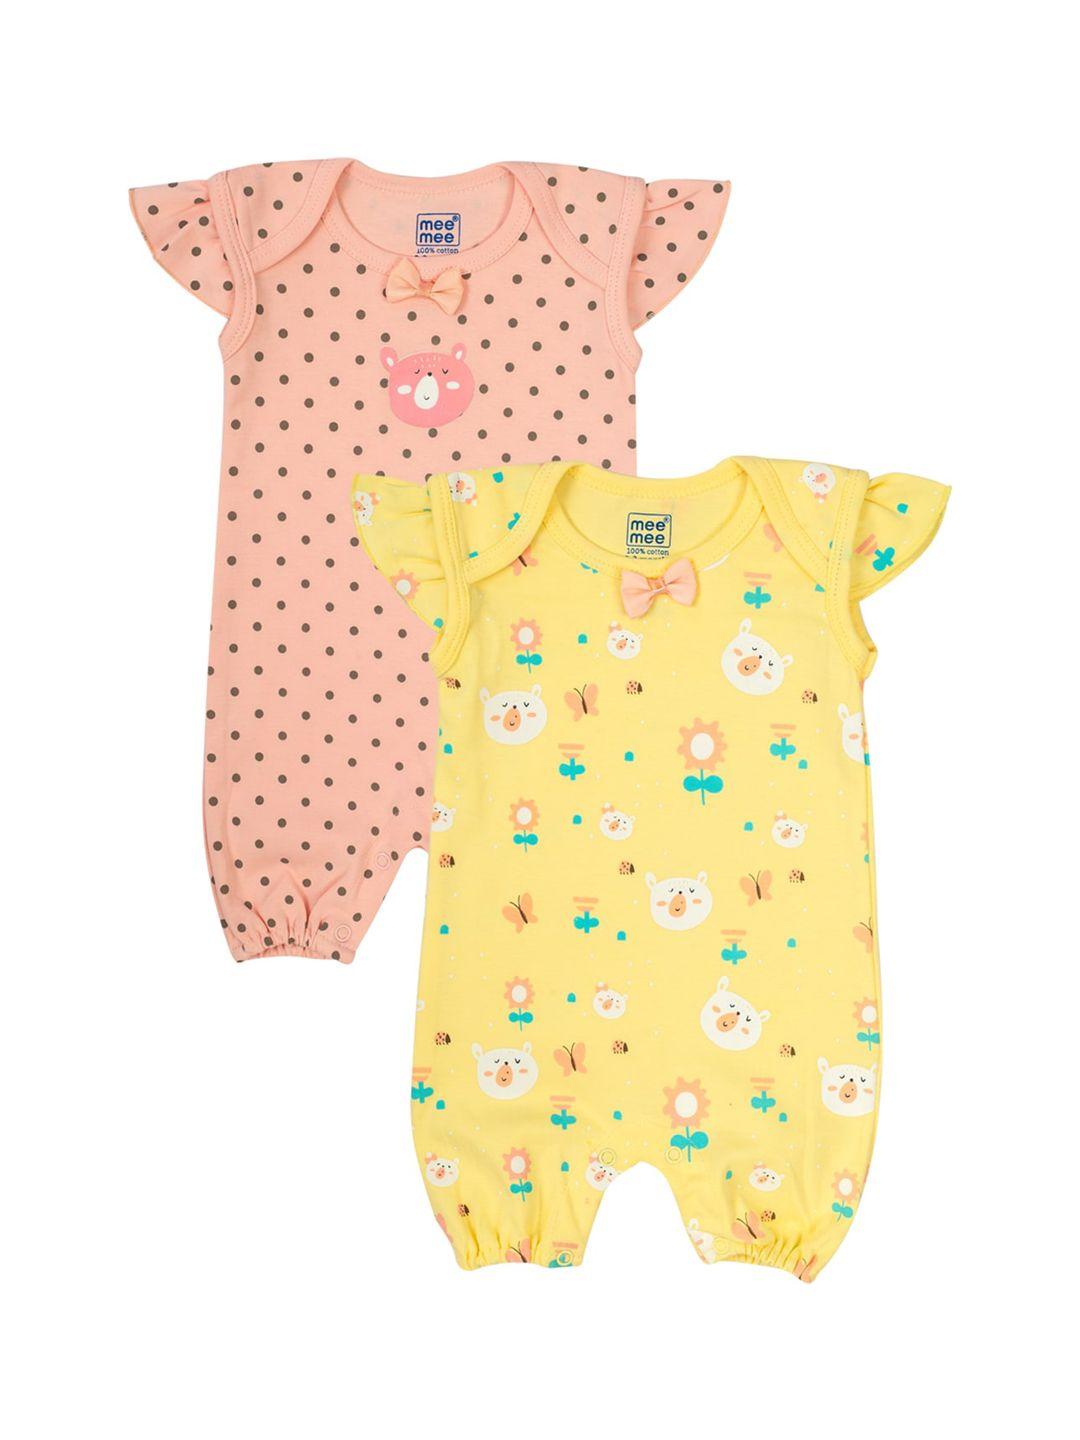 meemee-infant-girls-pack-of-2-yellow-&-white-printed-cotton-rompers